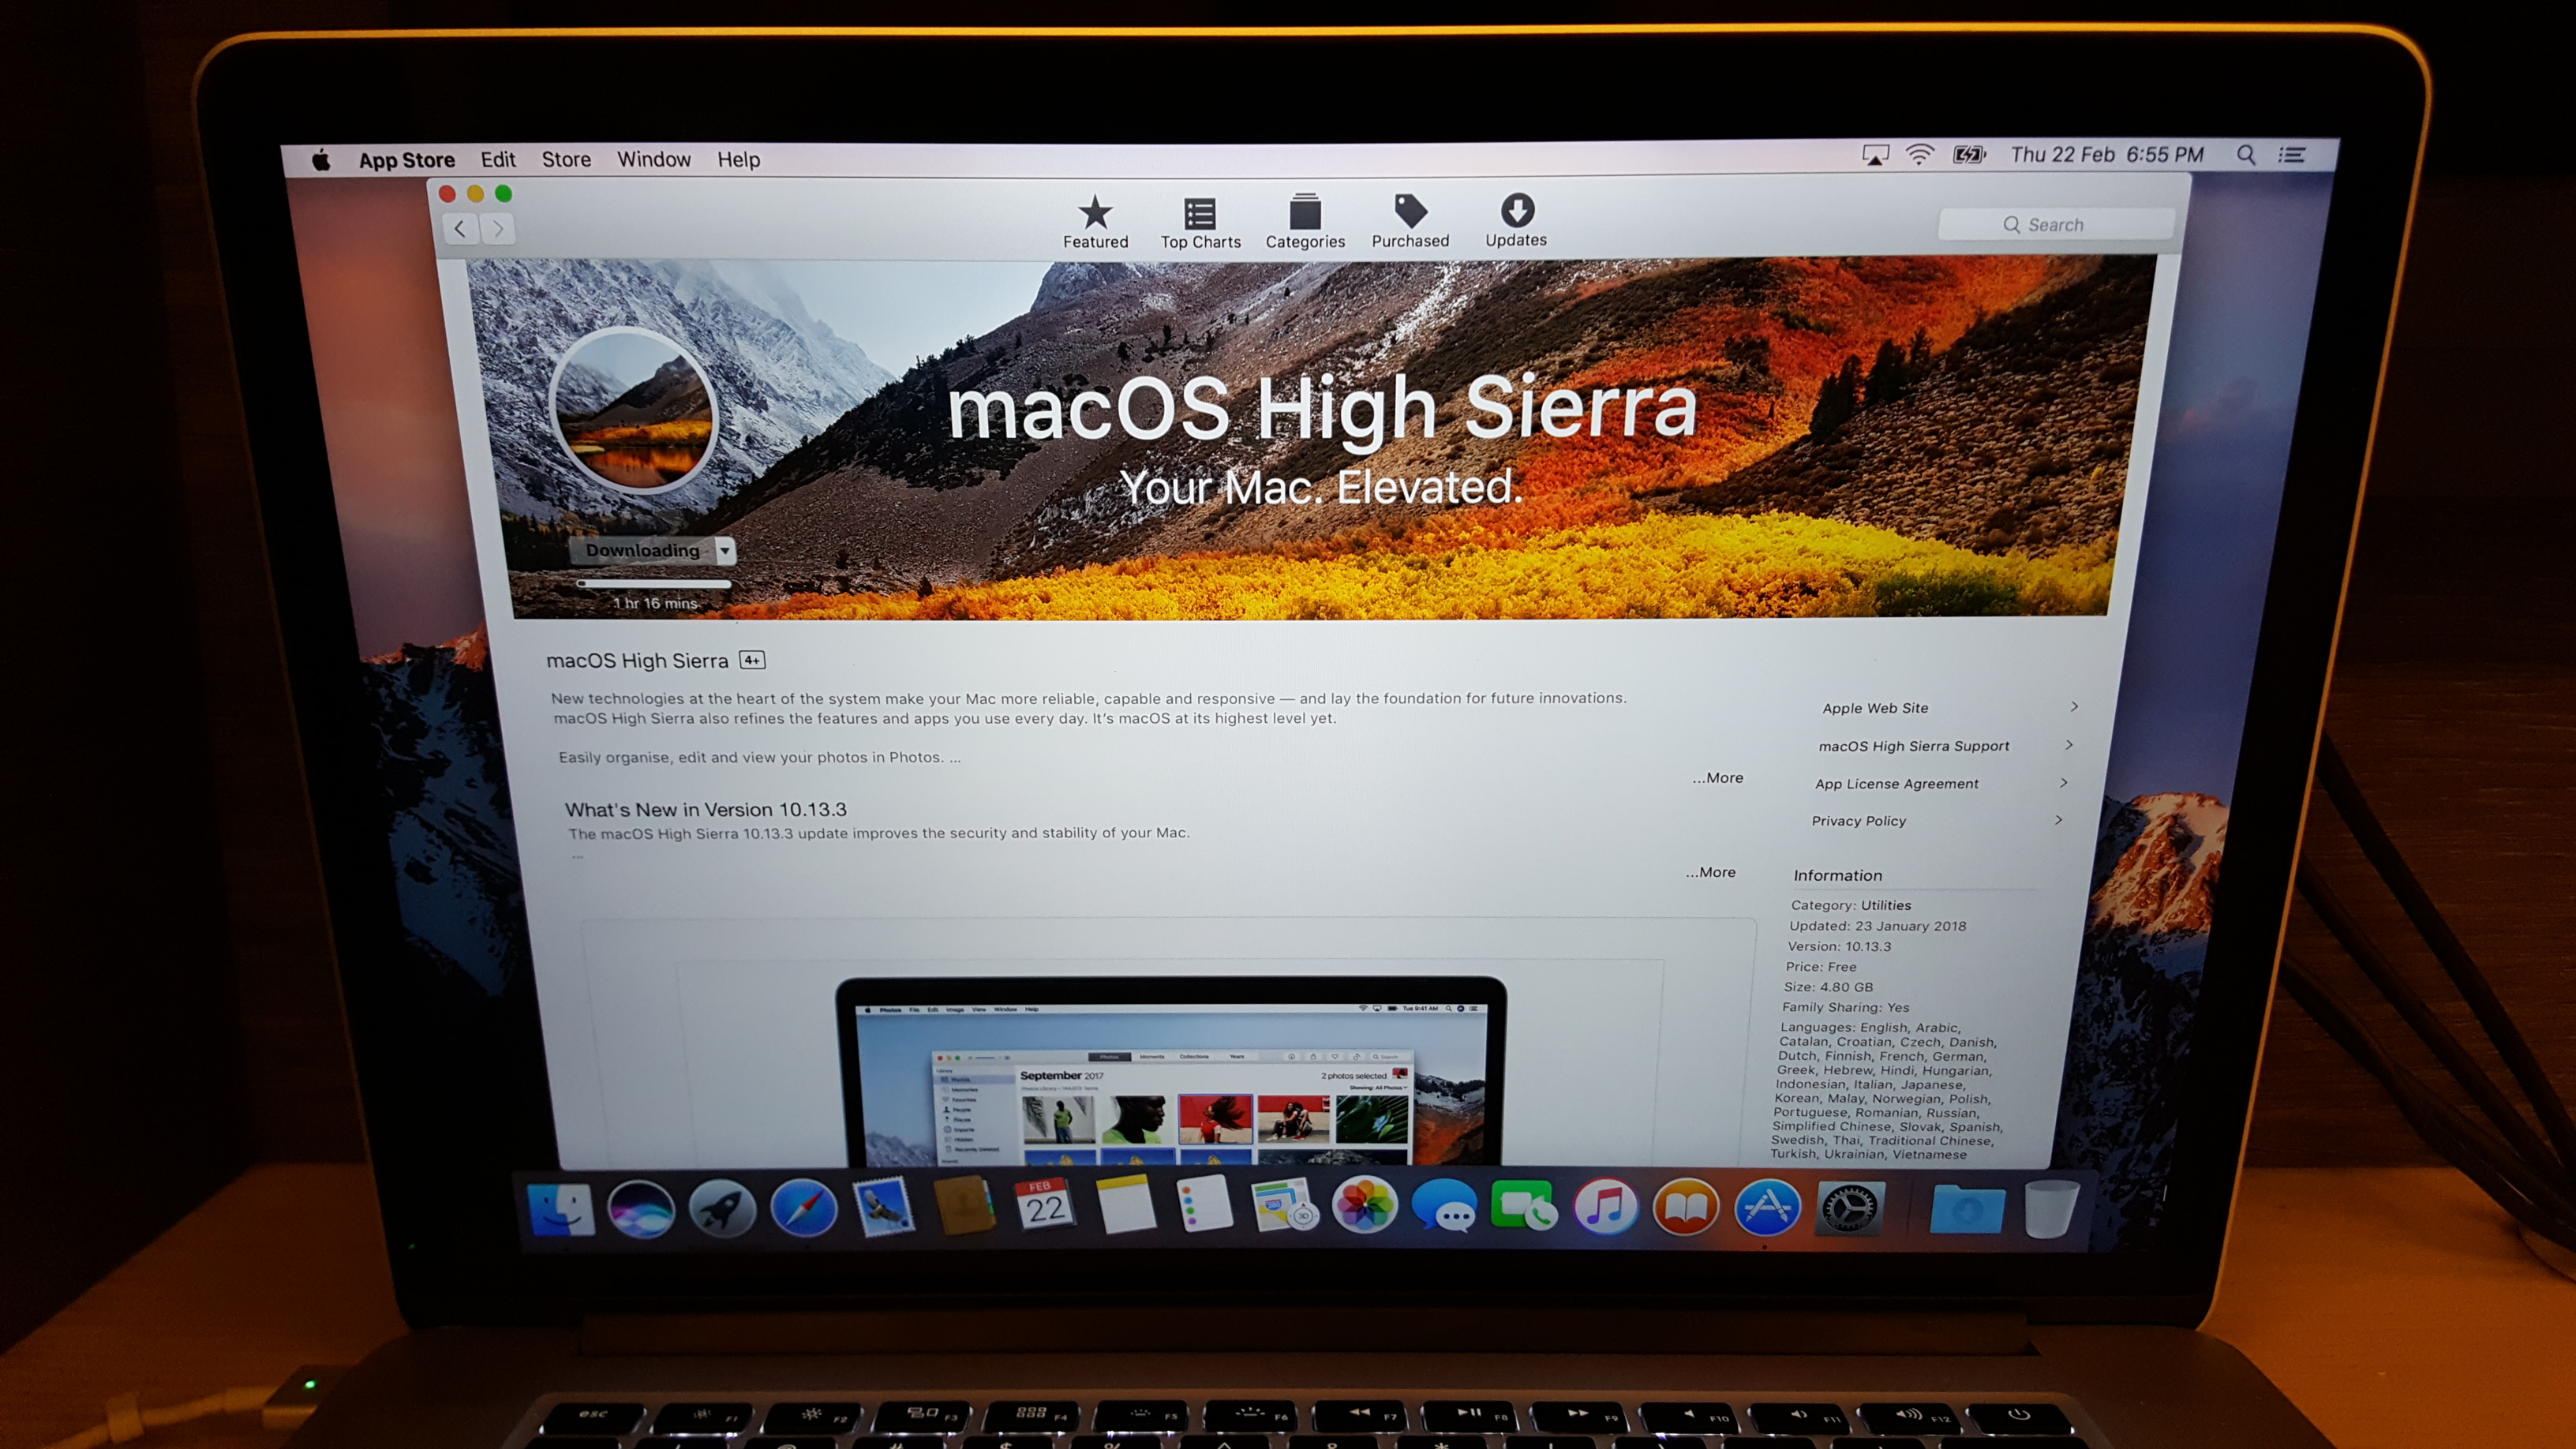 is a 2012 mac too old for high sierra